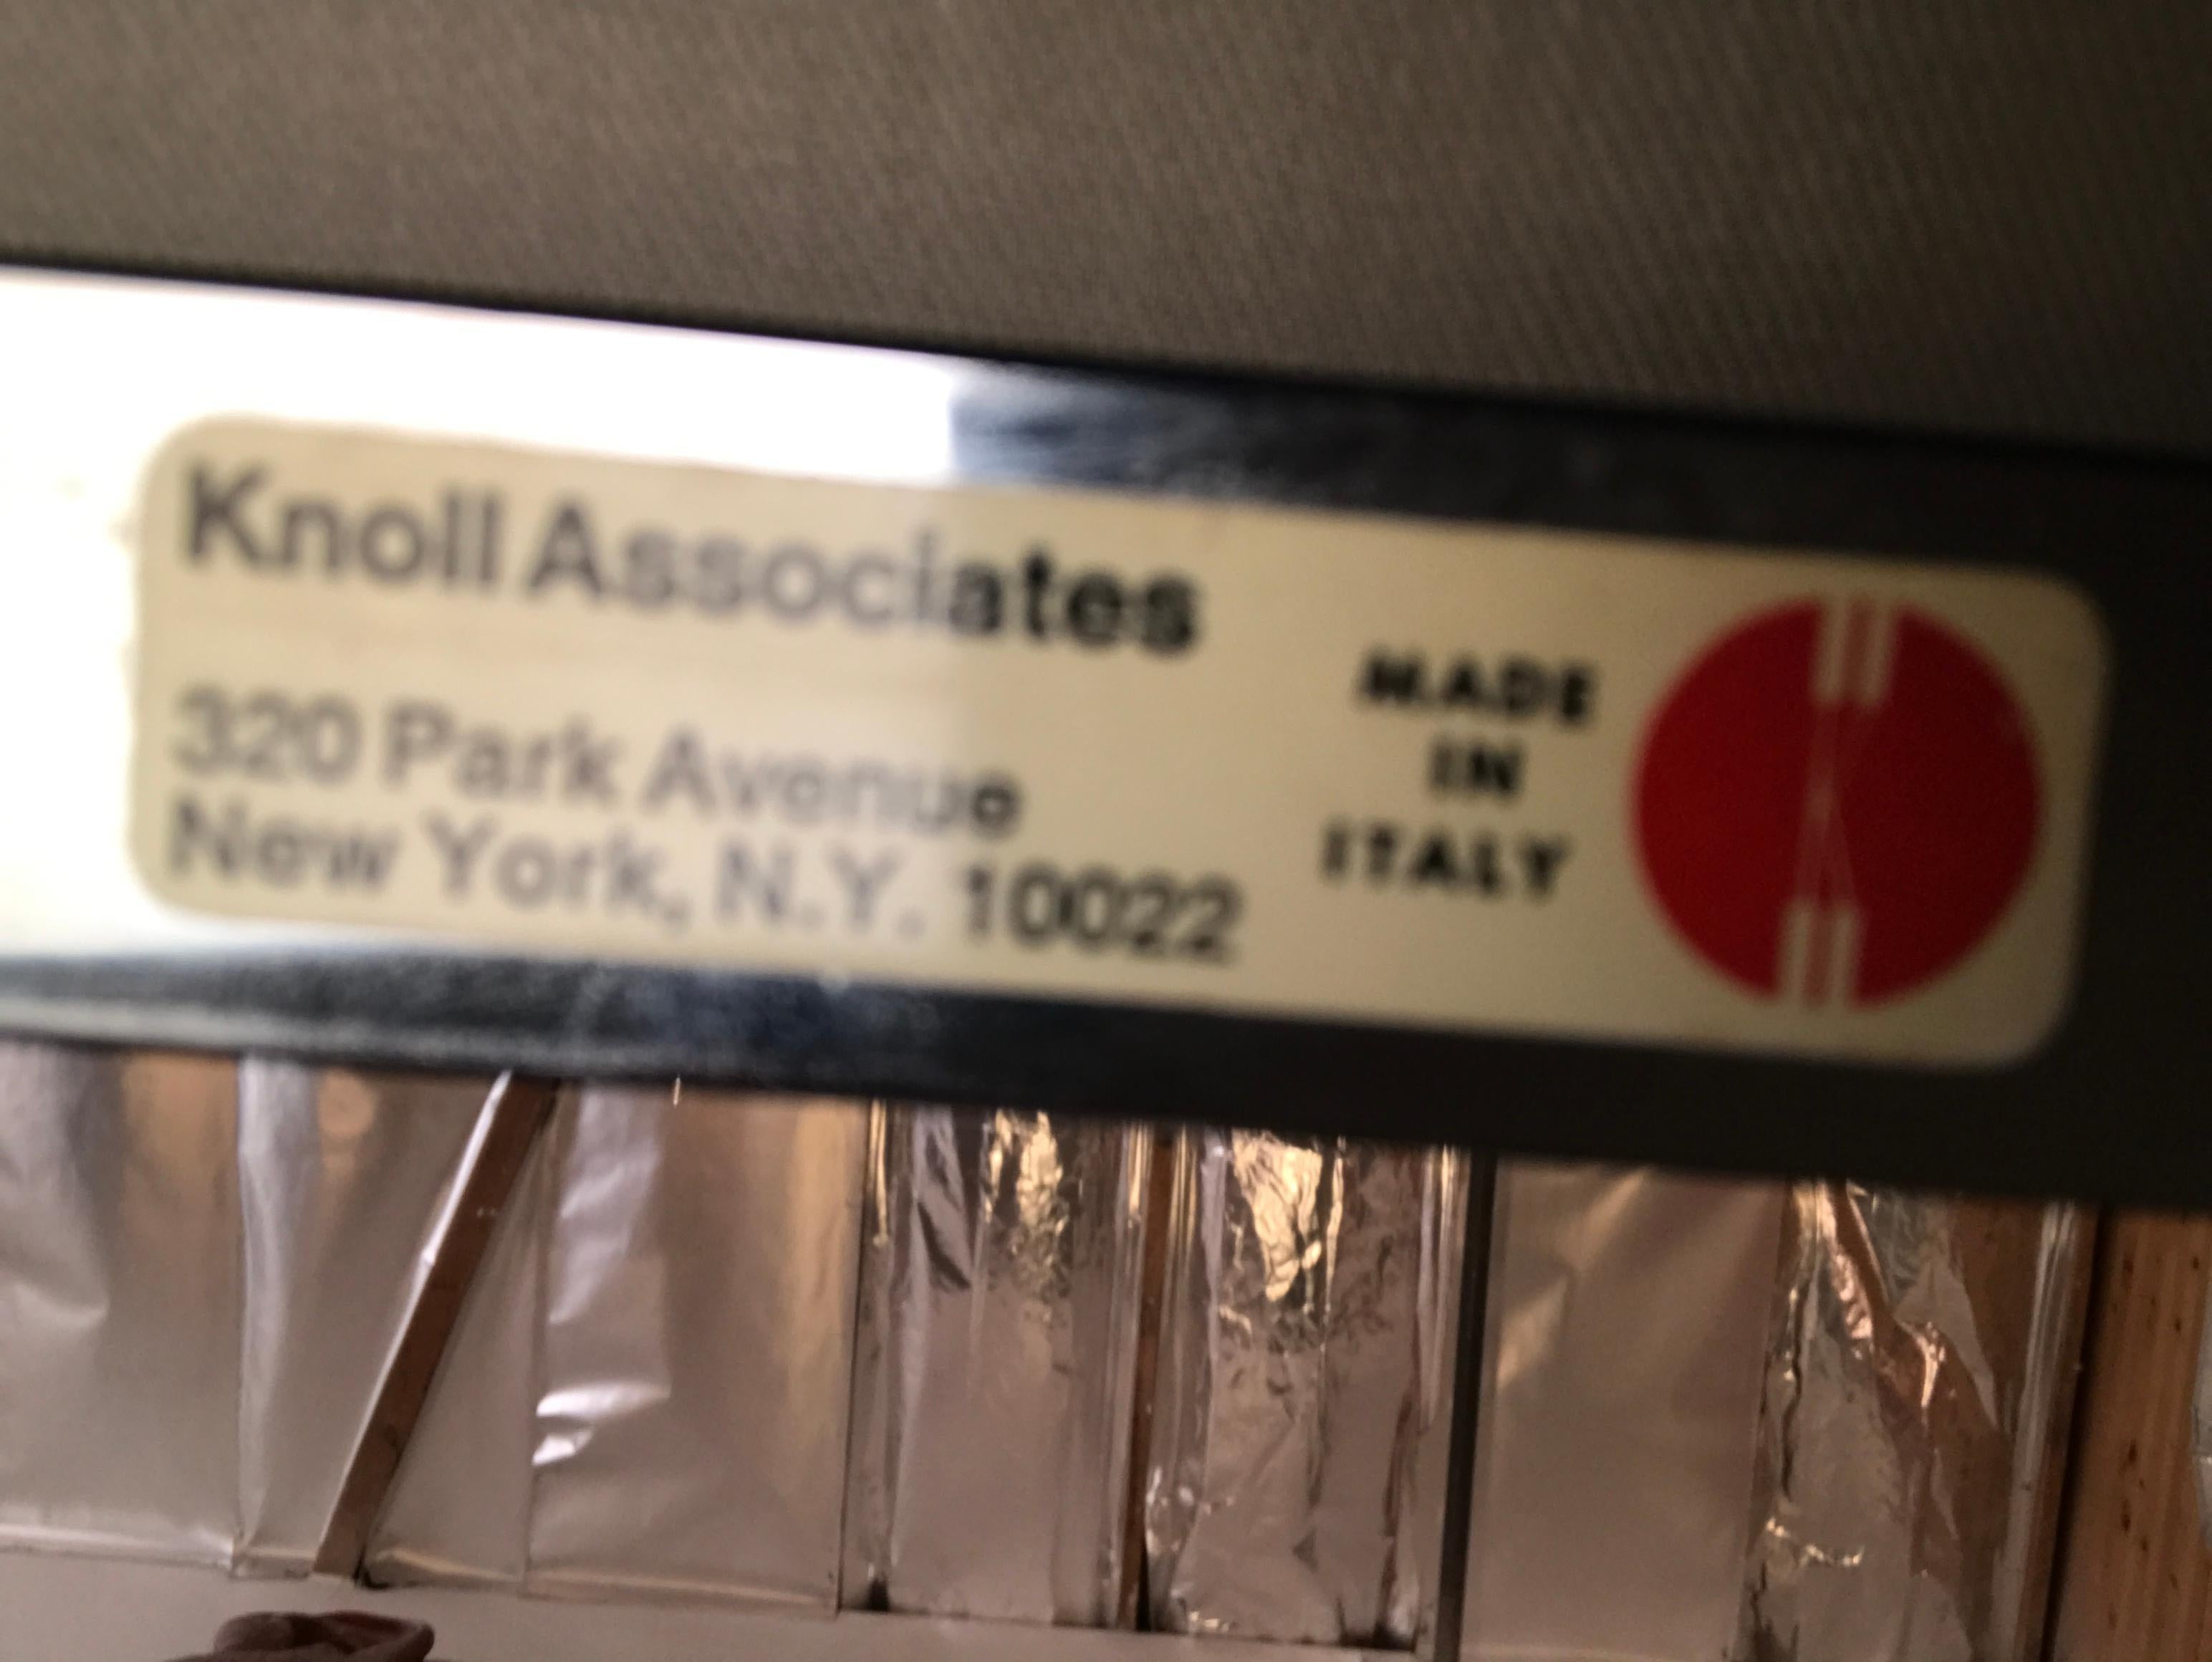 Knoll Associates Couch, Park Avenue, New York, Made in Italy For Sale 3